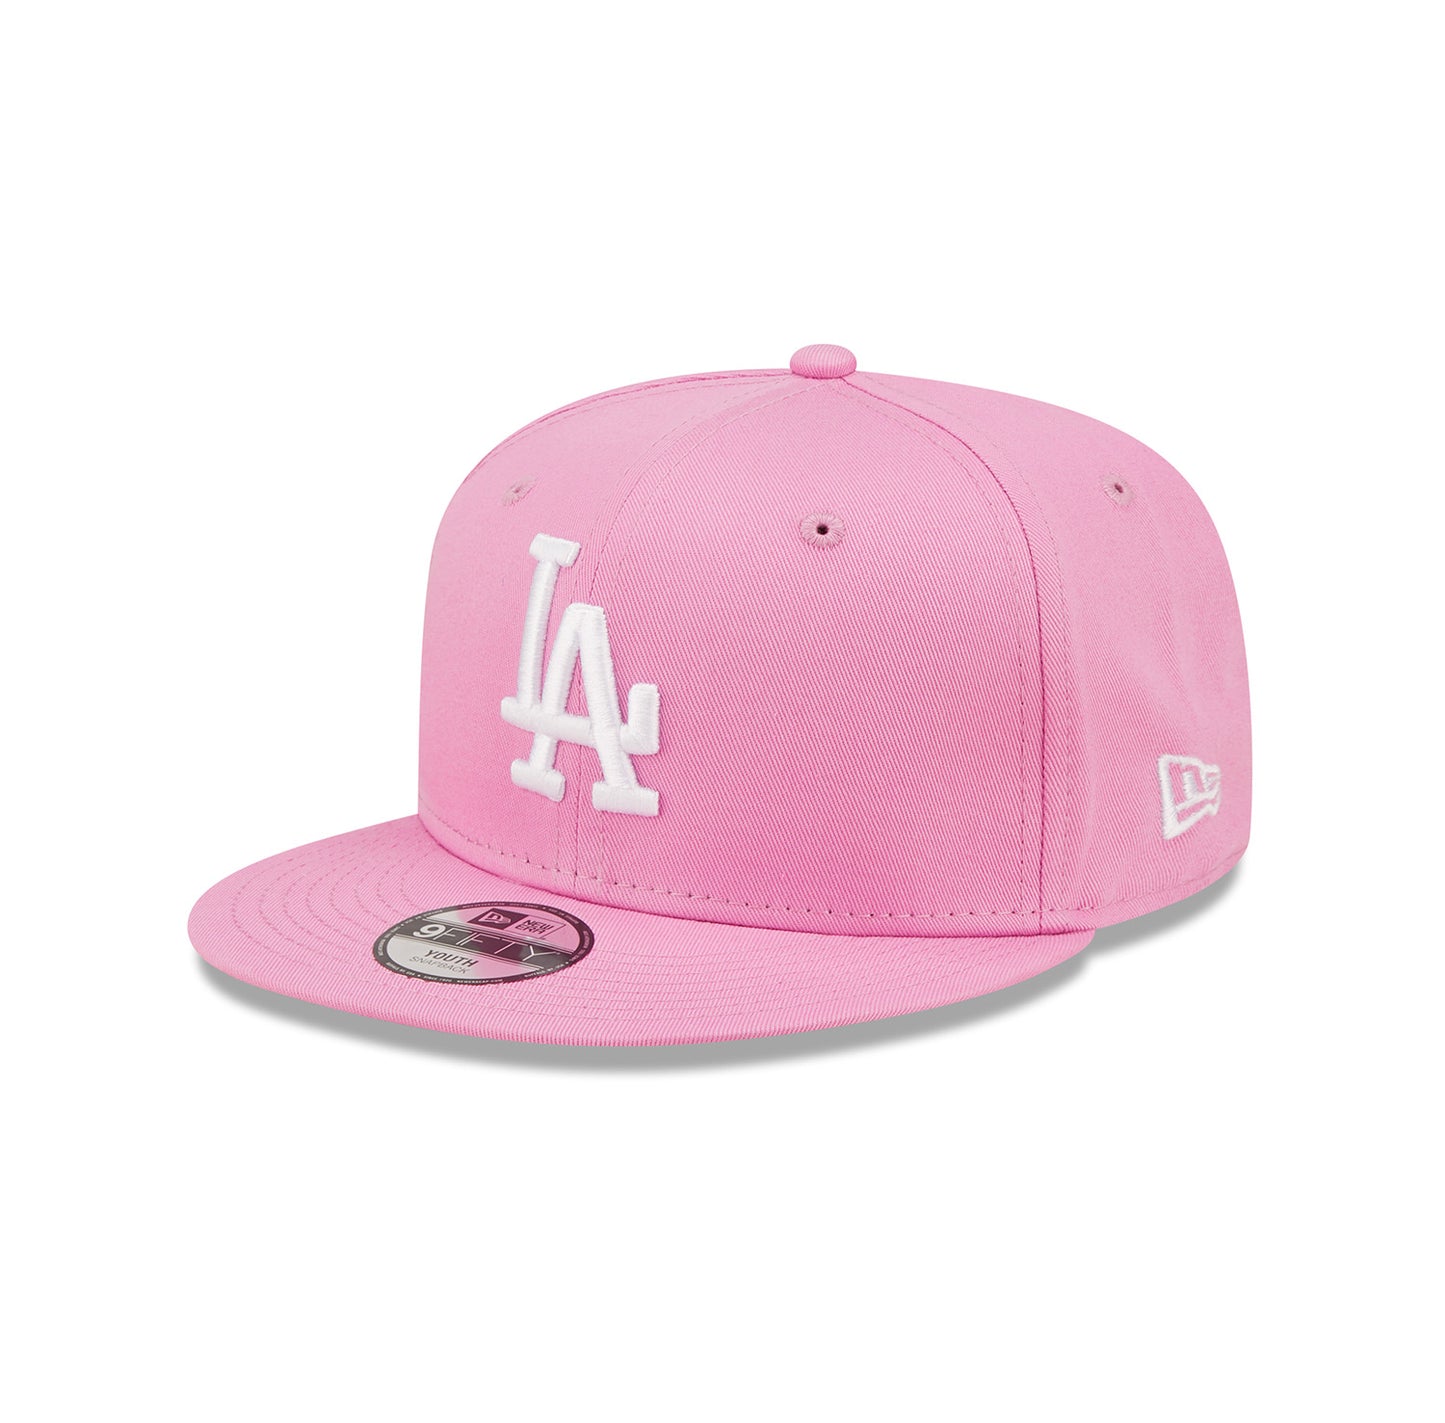 Los Angeles Dodgers 9FIFTY YOUTH New Era Snap Back Pink